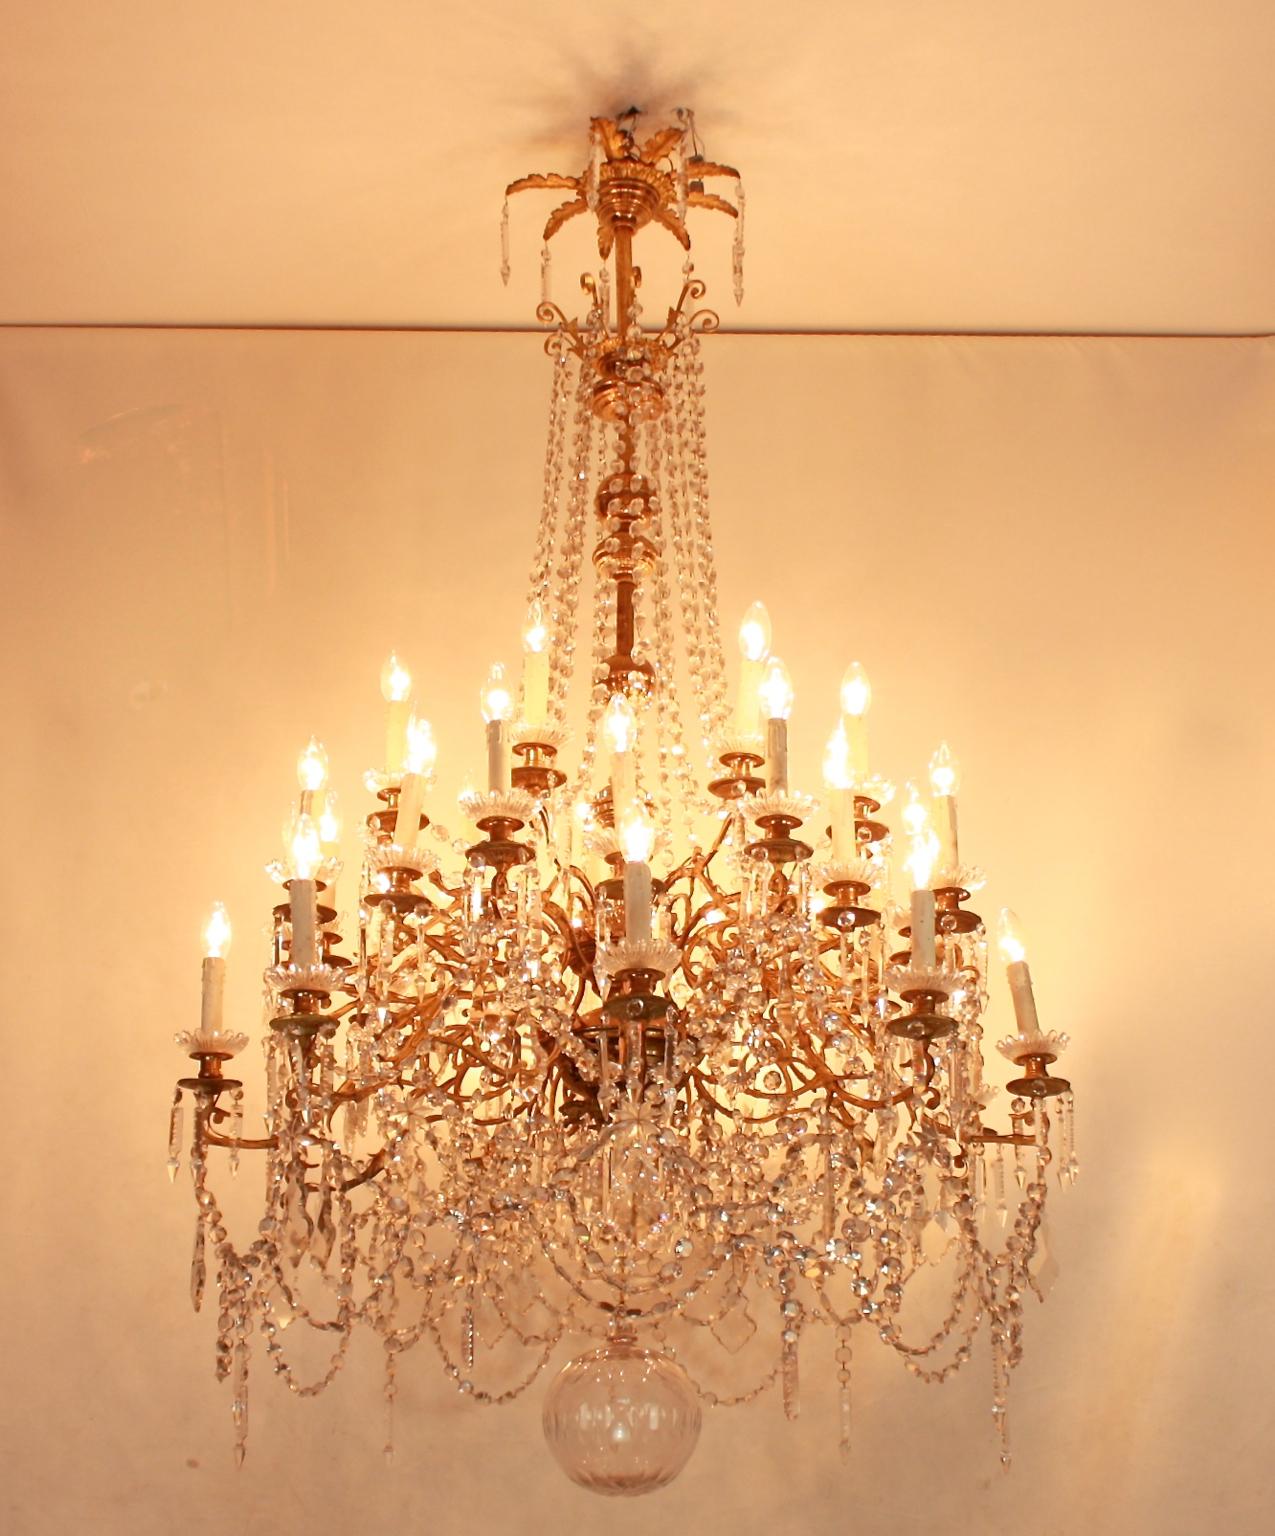 Monumental Regence-style thirty-six light gilt bronze and crystal-cut chandelier from circa 1860. The massive central baluster stem finely cast with mascarons, arabesque ornament and acanthus leaves, issuing thirty six scrolling foliate candlearms